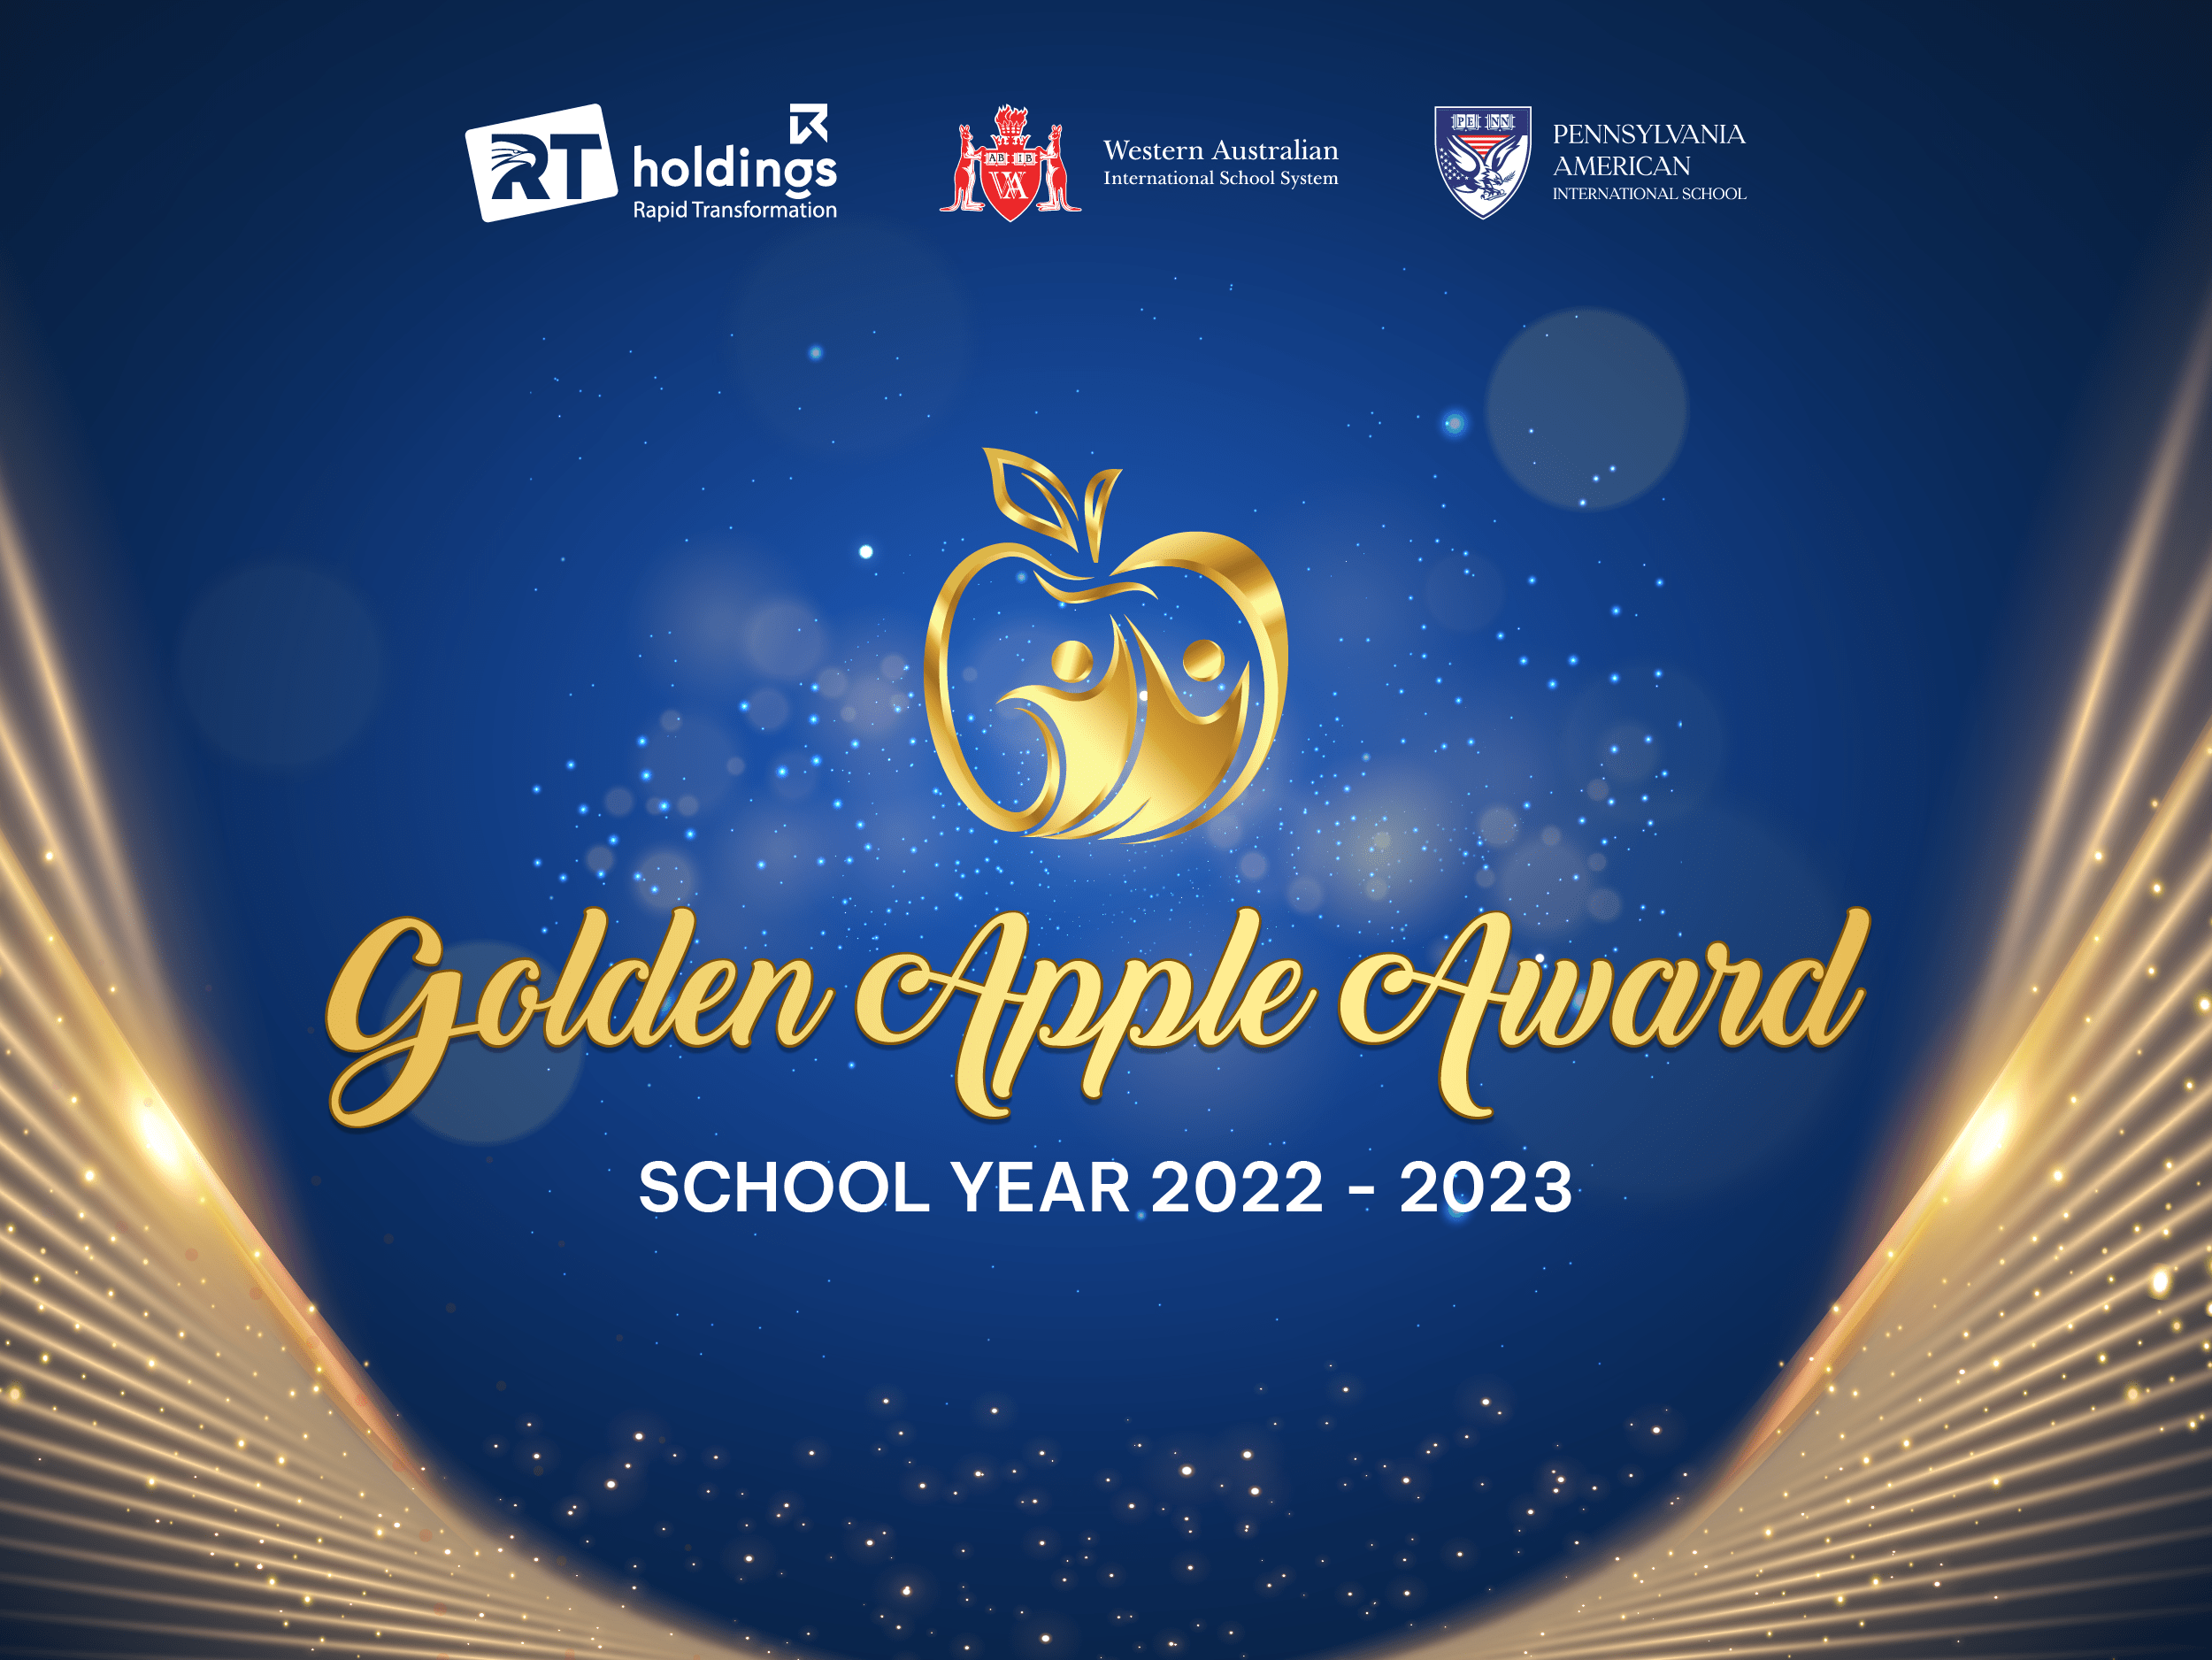 Officially opening The Golden Apple Award vote for The Academic Year